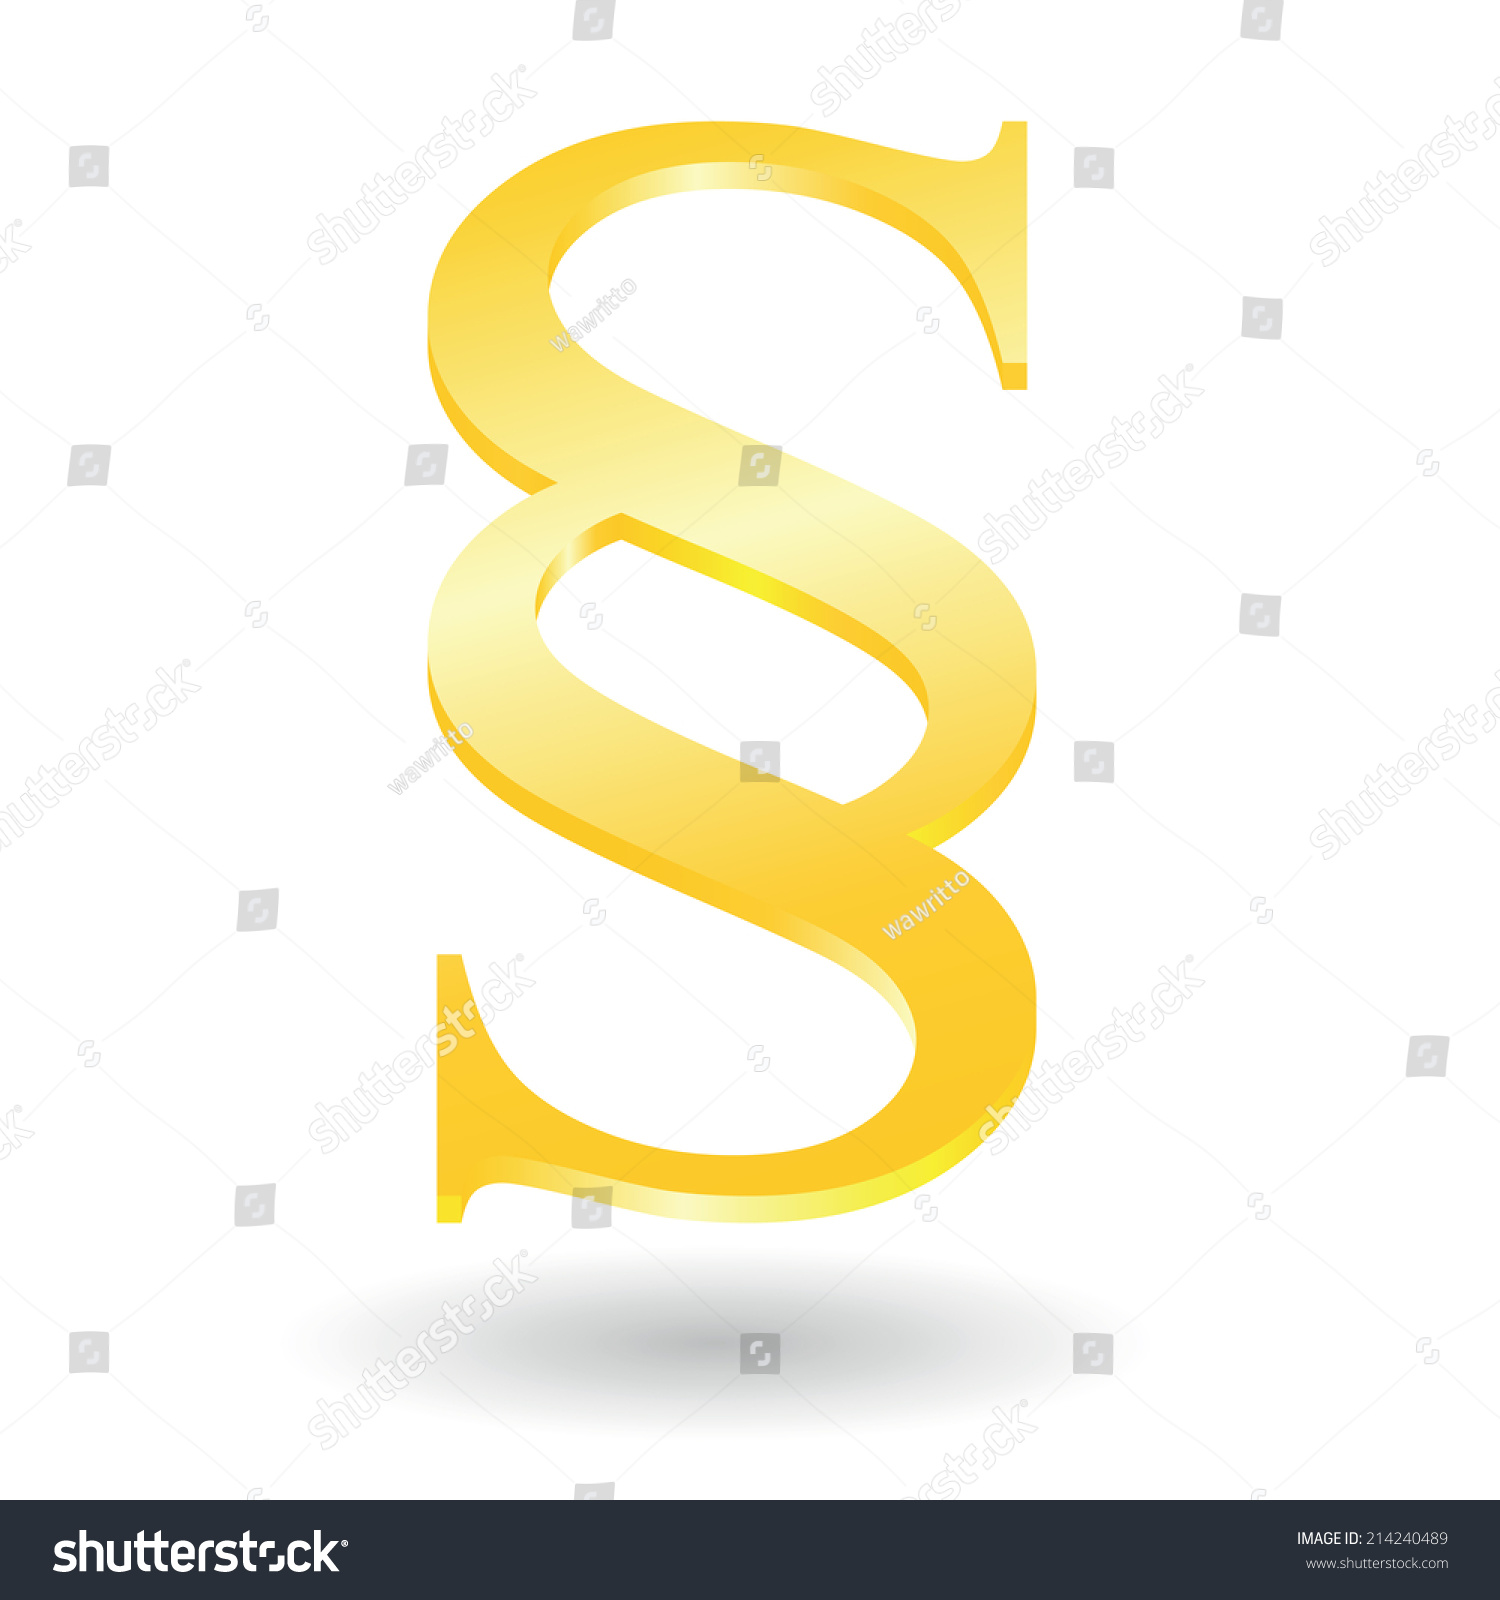 Golden Paragraph Symbol Isolated On White Stock Vector 214240489 ...